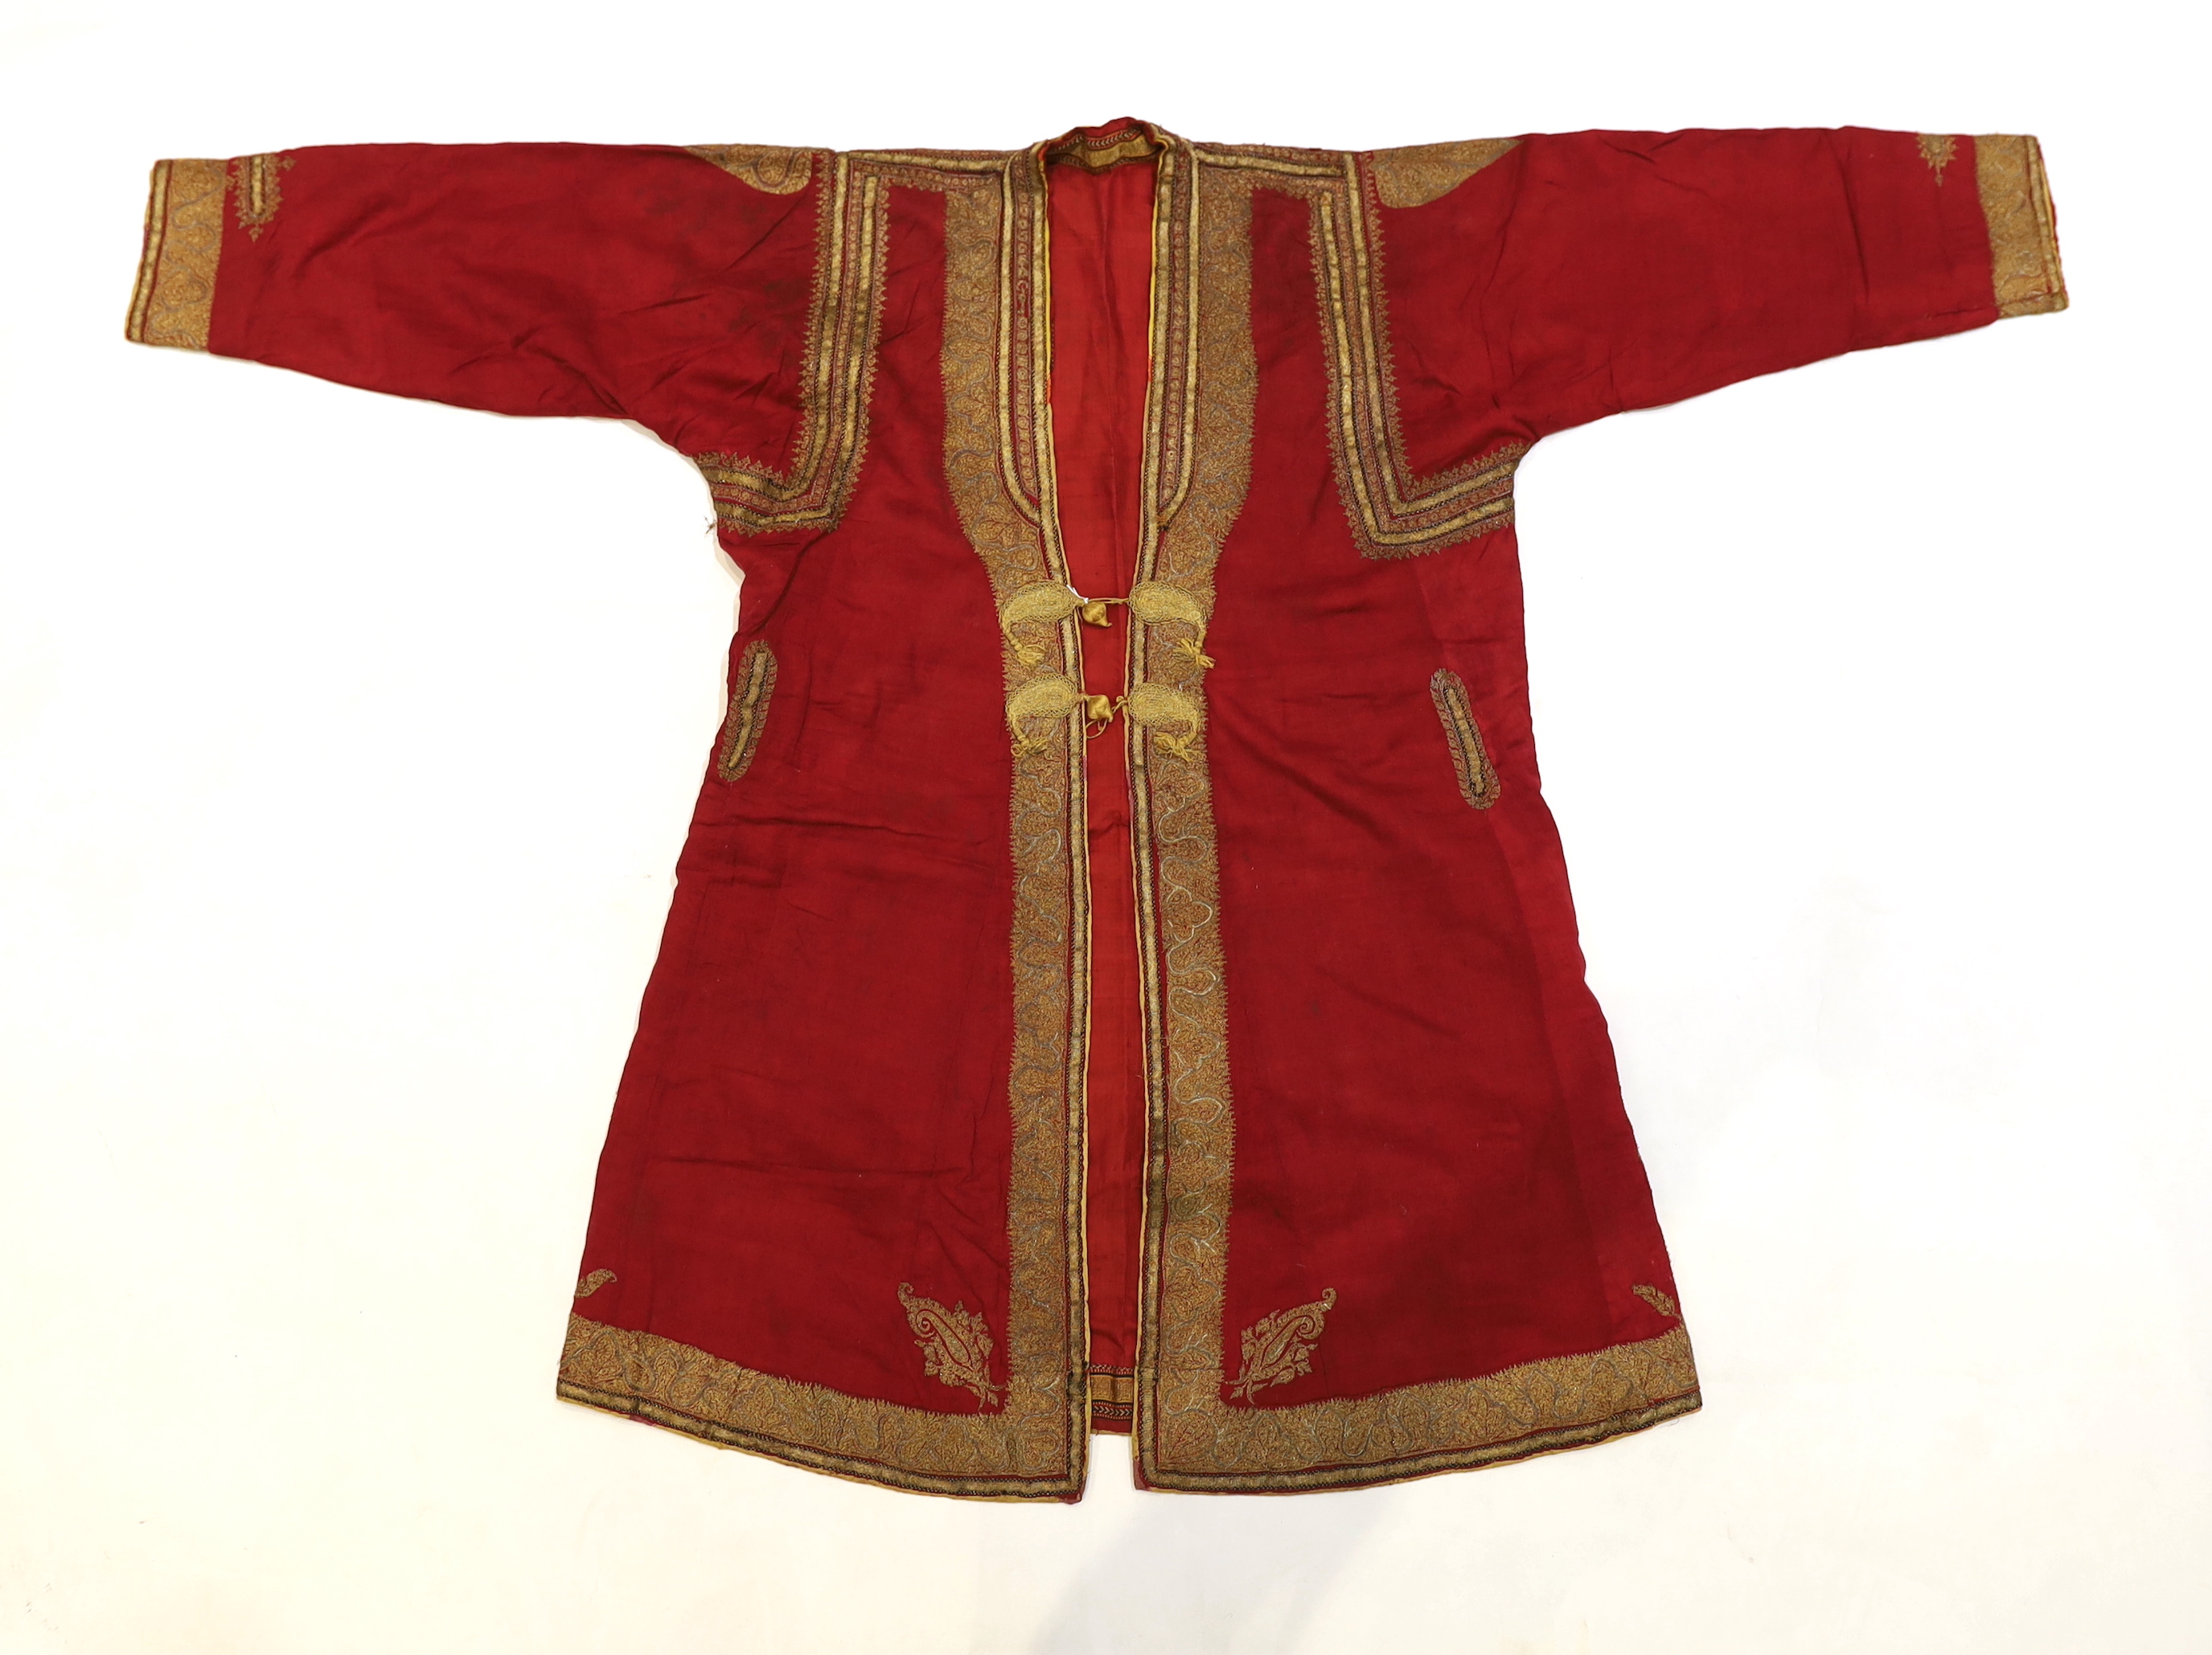 A late 19th century gentleman’s quilted red silk Indian Chogha, embroidered with ornate gold and silver metallic thread borders and paisley design details